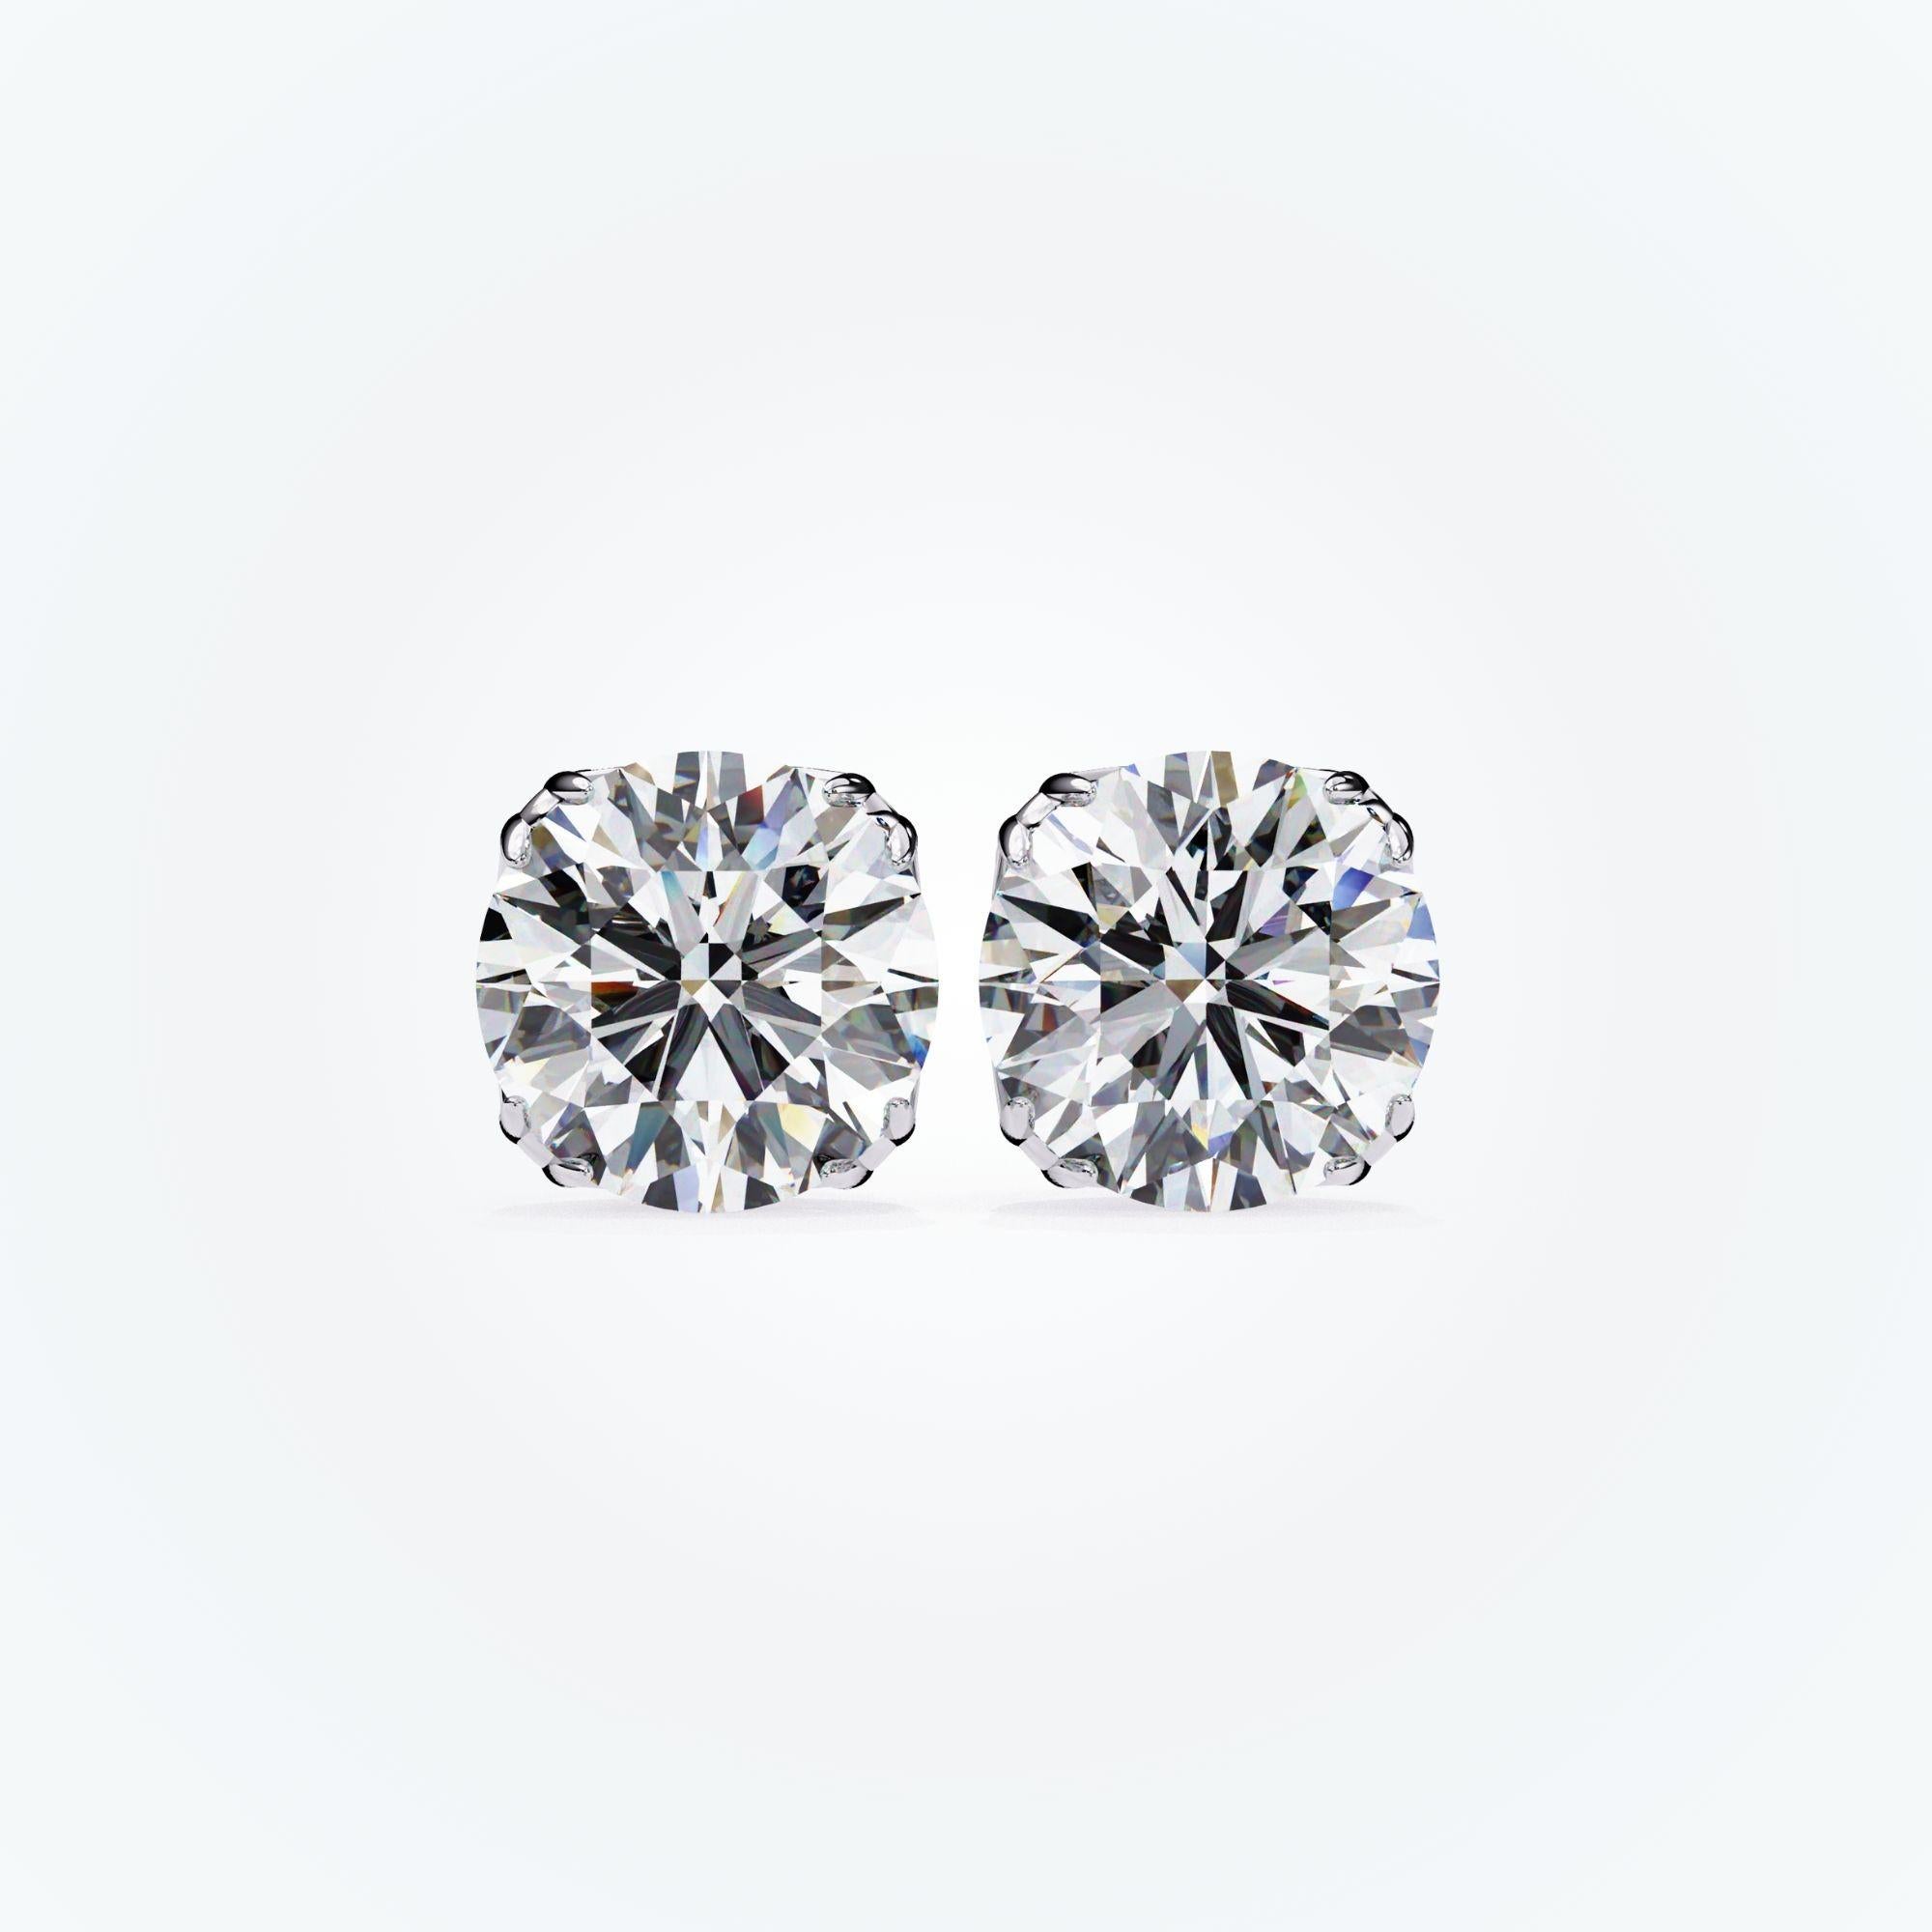 Natural Diamond Studs, Floral, 8 Prongs, 1/2 carat total weight, 14K Solid Gold In New Condition For Sale In New York, NY